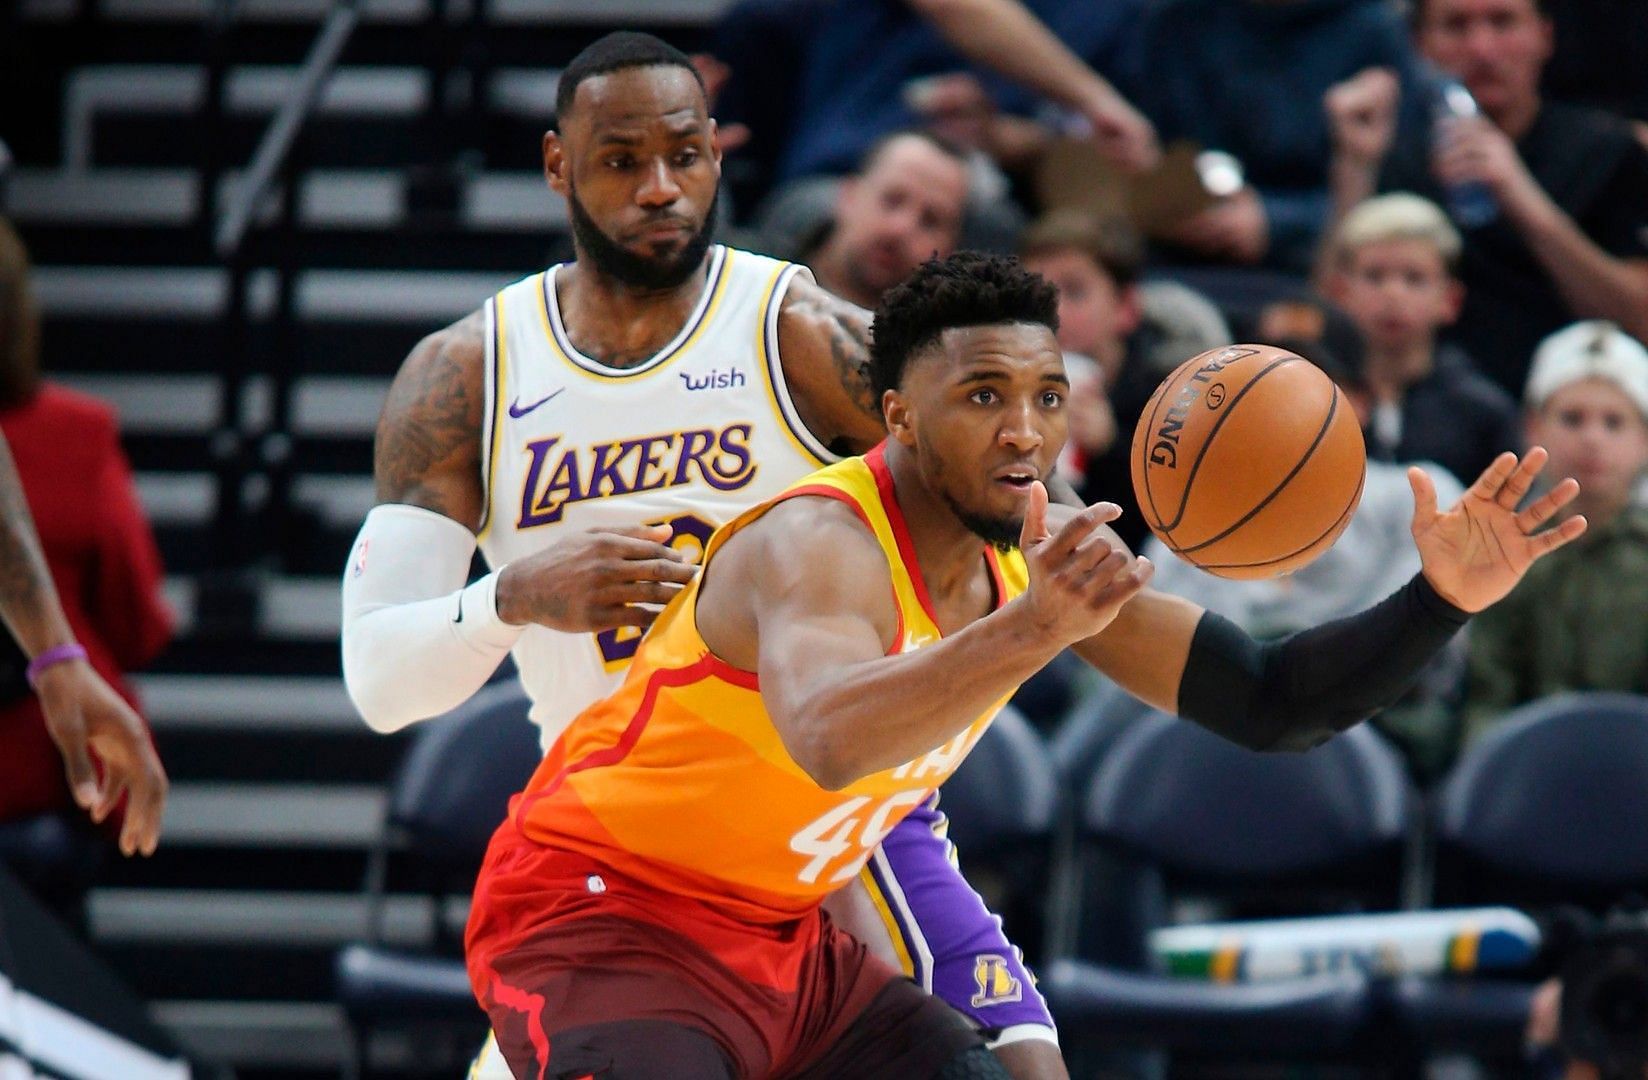 The visiting Utah Jazz are looking to even their season series against the slumping LA Lakers on Wednesday. [Photo: Sporting News]